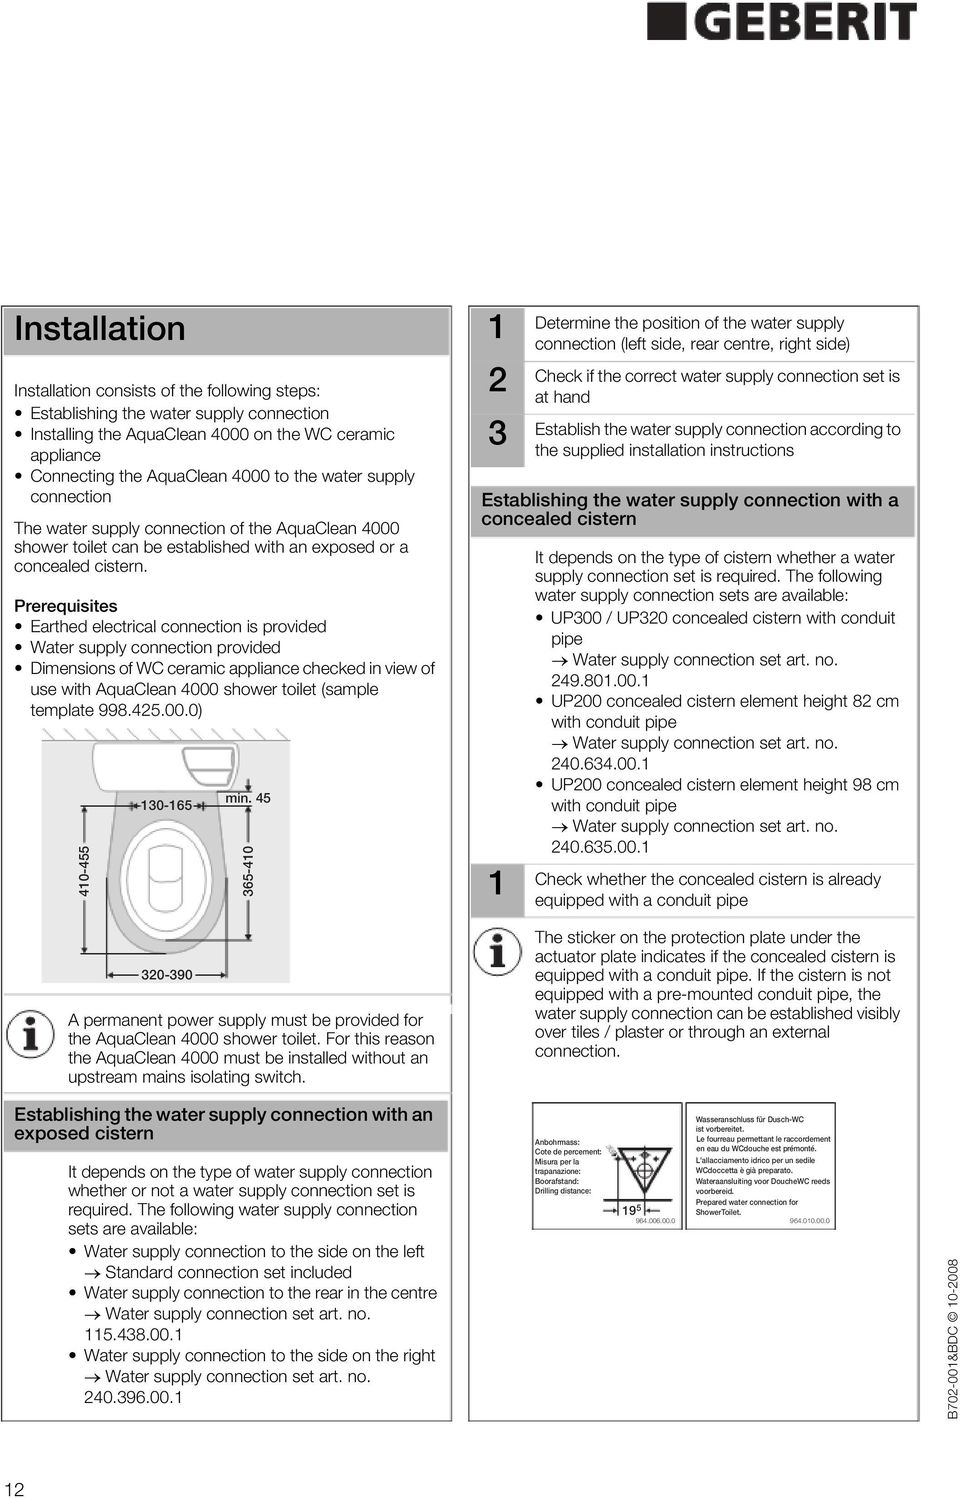 Prerequisites Earthed electrical connection is provided Water supply connection provided Dimensions of WC ceramic appliance checked in view of use with AquaClean 000 shower toilet (sample template